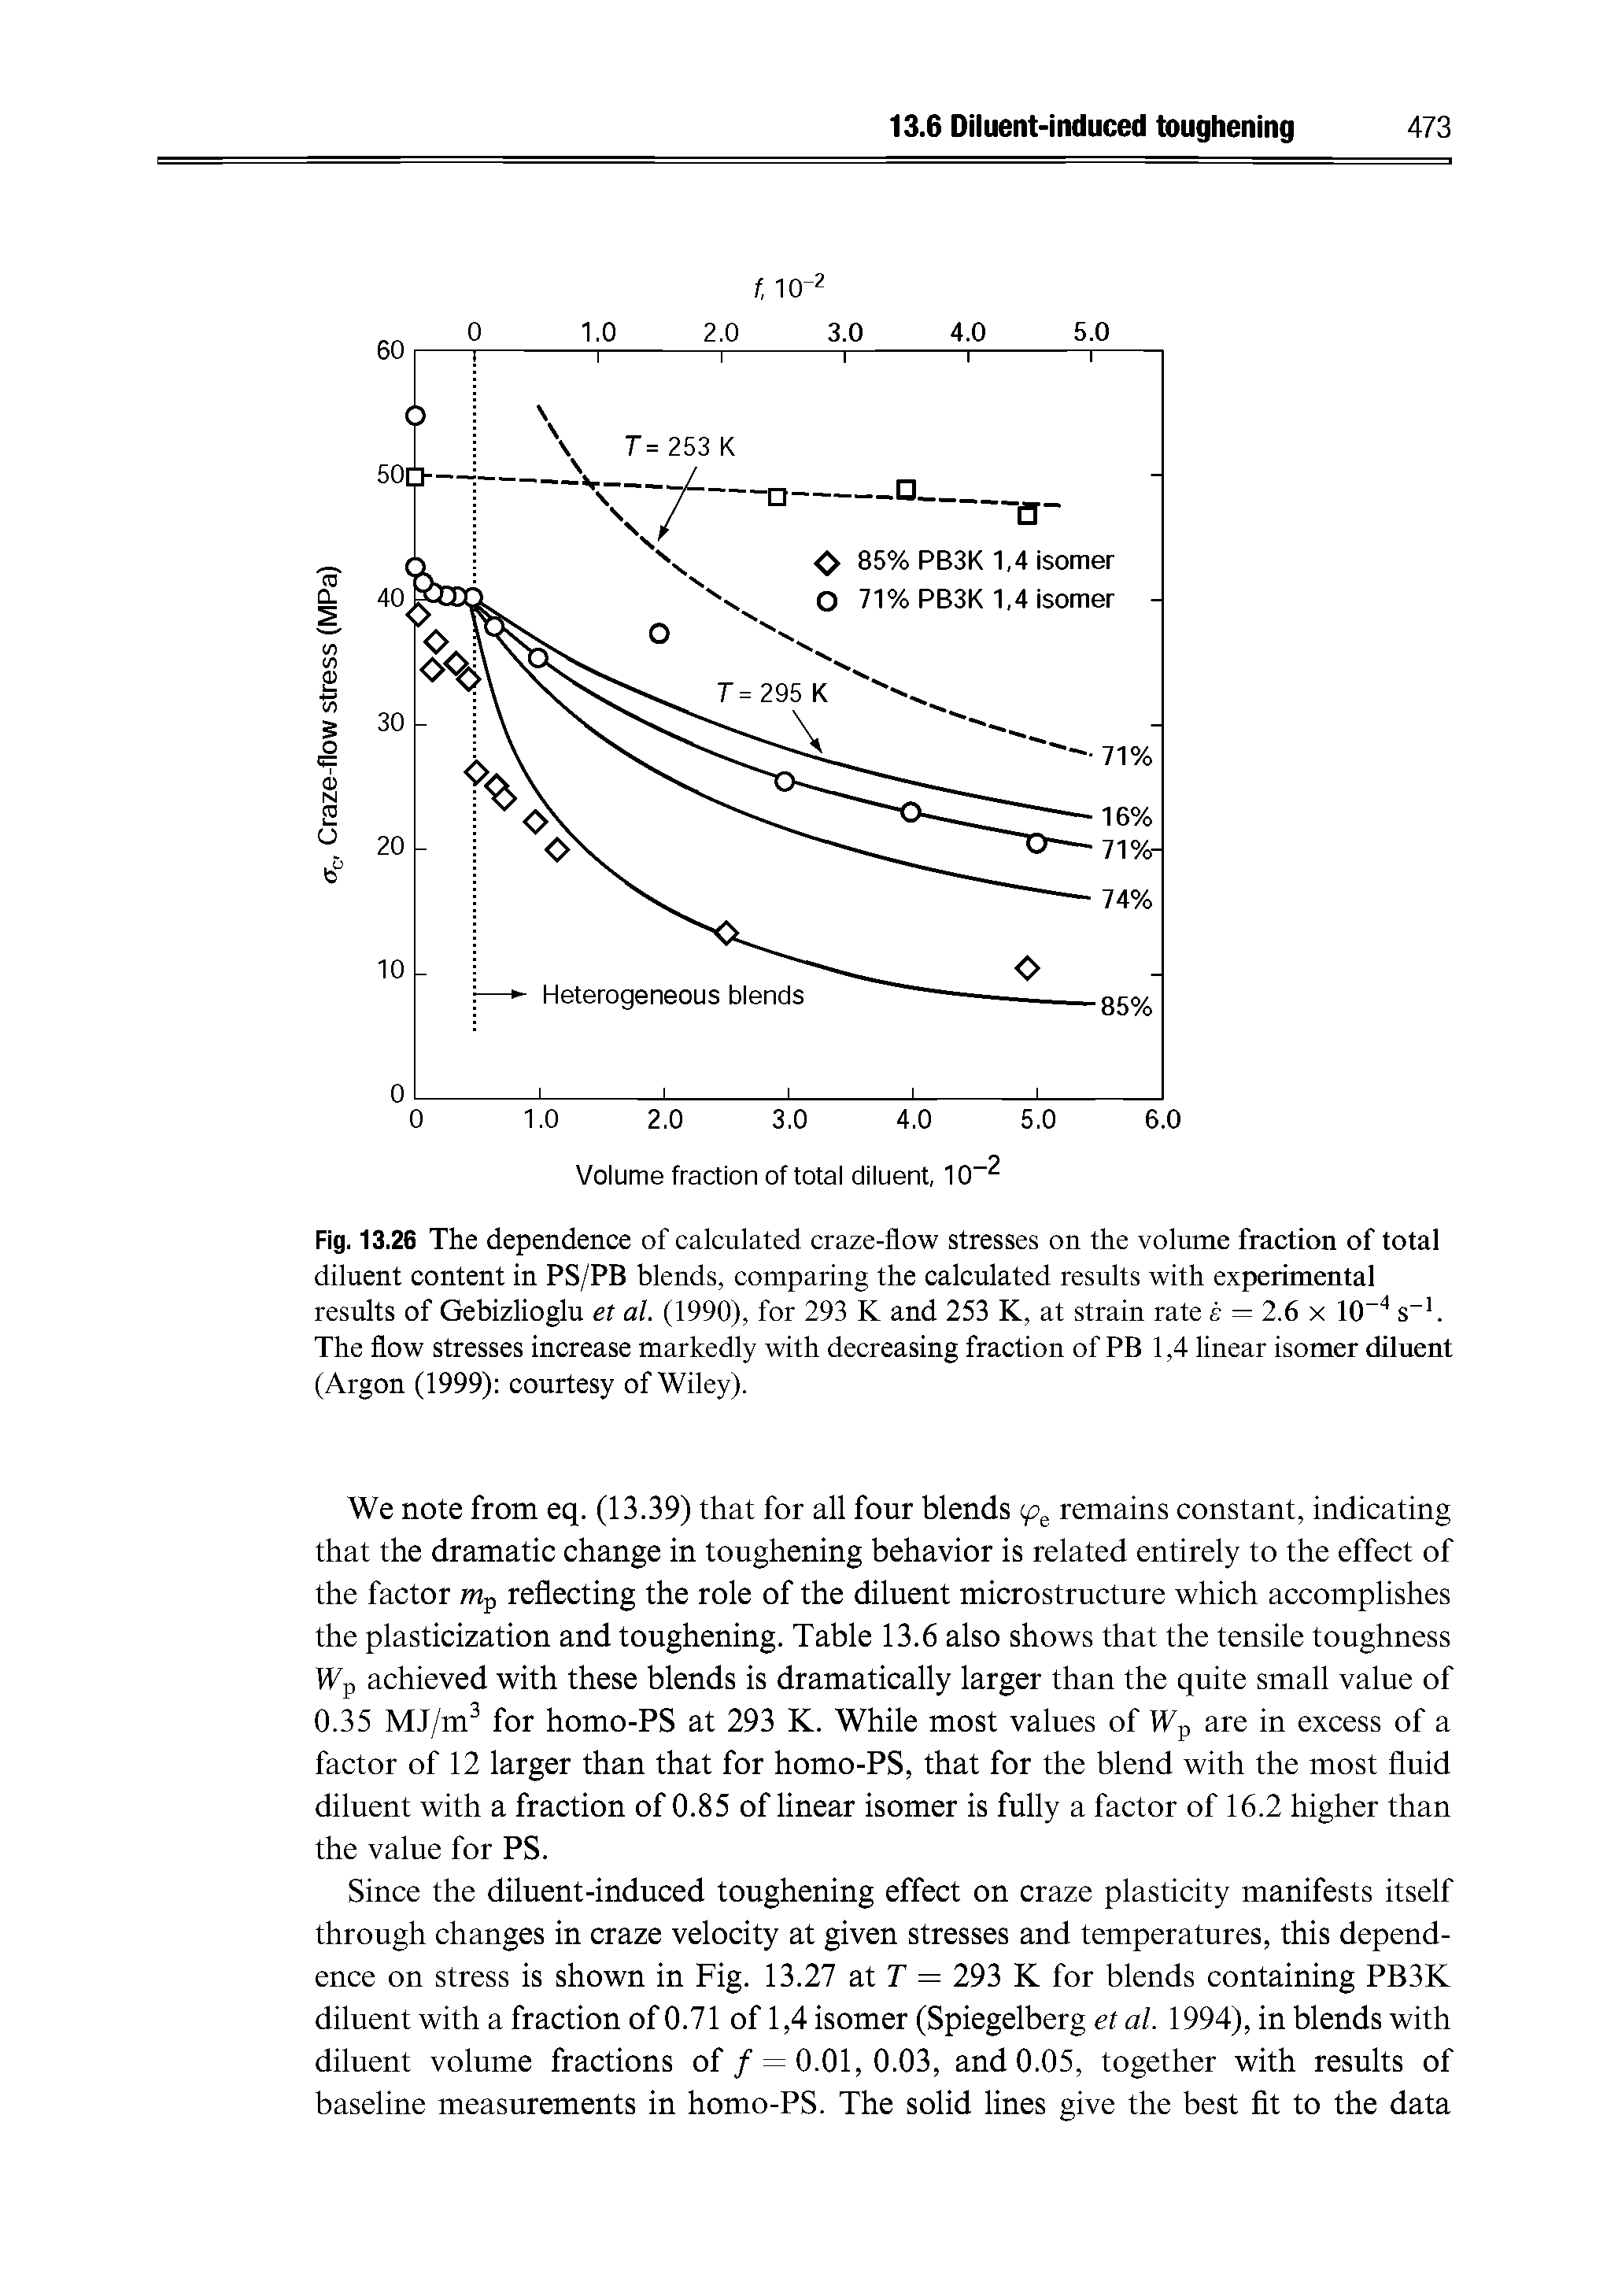 Fig. 13.26 The dependence of calculated craze-flow stresses on the volume fraction of total diluent content in PS/PB blends, comparing the calculated results with experimental results of Gebizlioglu et al. (1990), for 293 K and 253 K, at strain rate e = 2.6 x 10 s . The flow stresses increase markedly with decreasing fraction of PB 1,4 linear isomer diluent (Argon (1999) courtesy of Wiley).